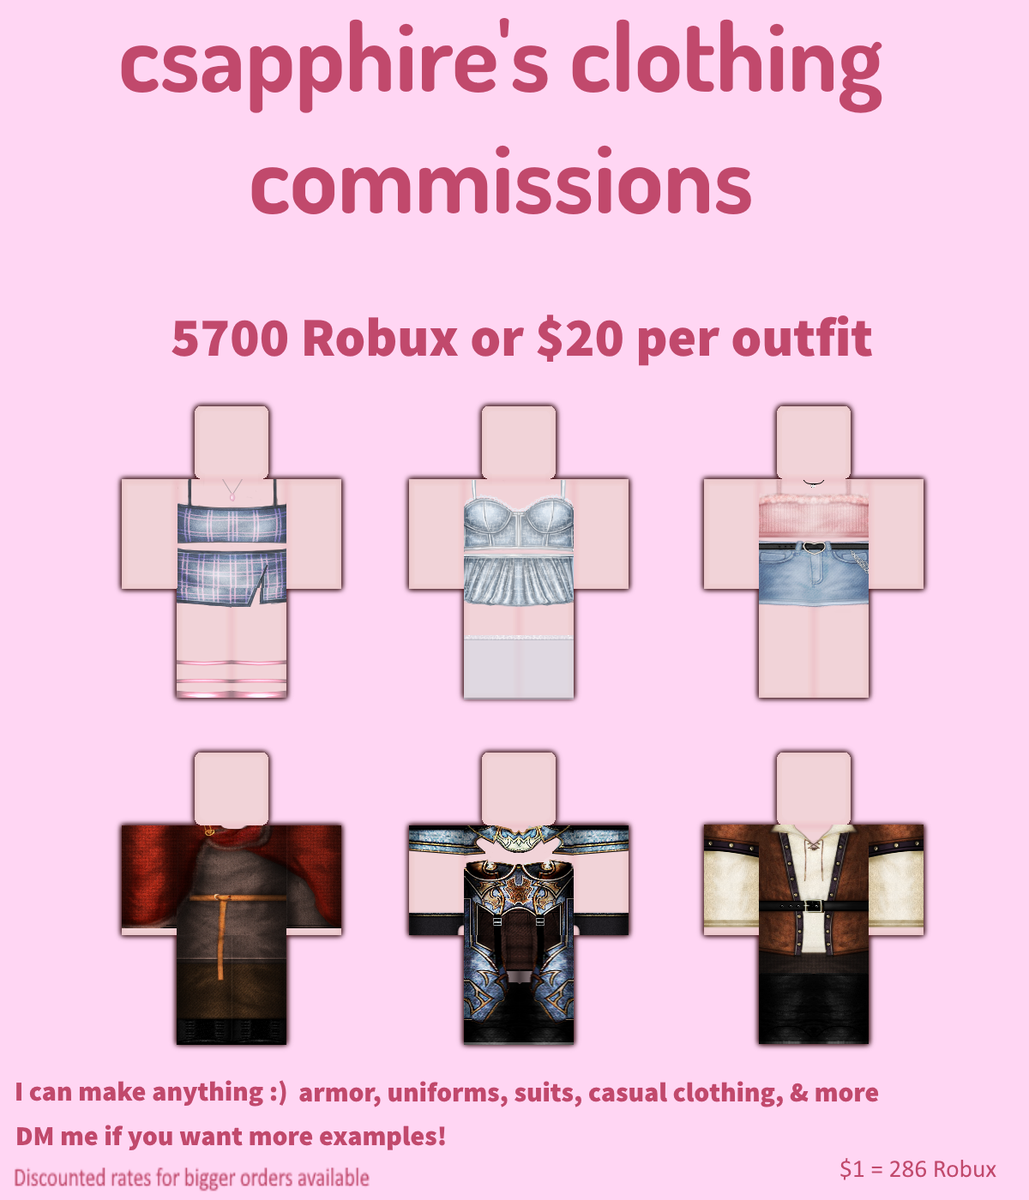 Csapphire Ky On Twitter Clothing Commissions I Can Make Anything From Armor Uniforms Men S Women S Clothing Suits And More 3 Slots Open Dm Me Discounted Rate Available For 5 - roblox dev outfits